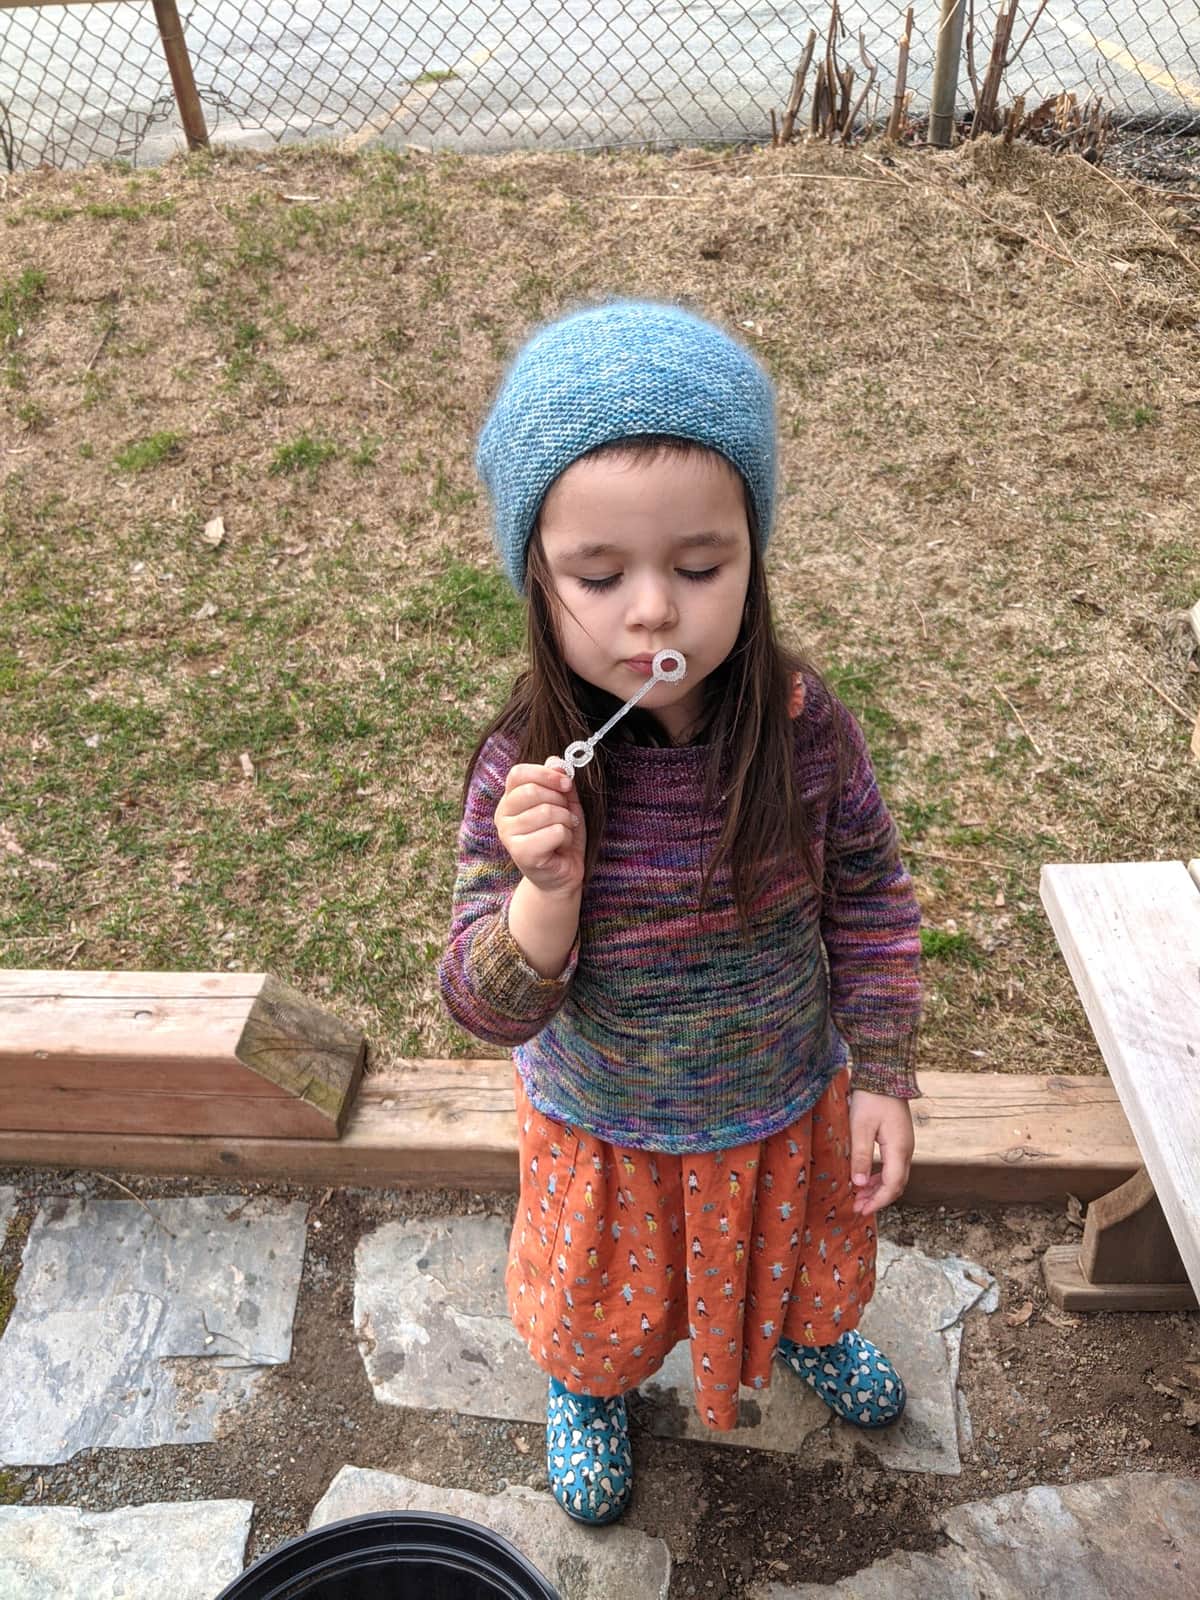 image description: a young child wearing a handknit hand and sweater